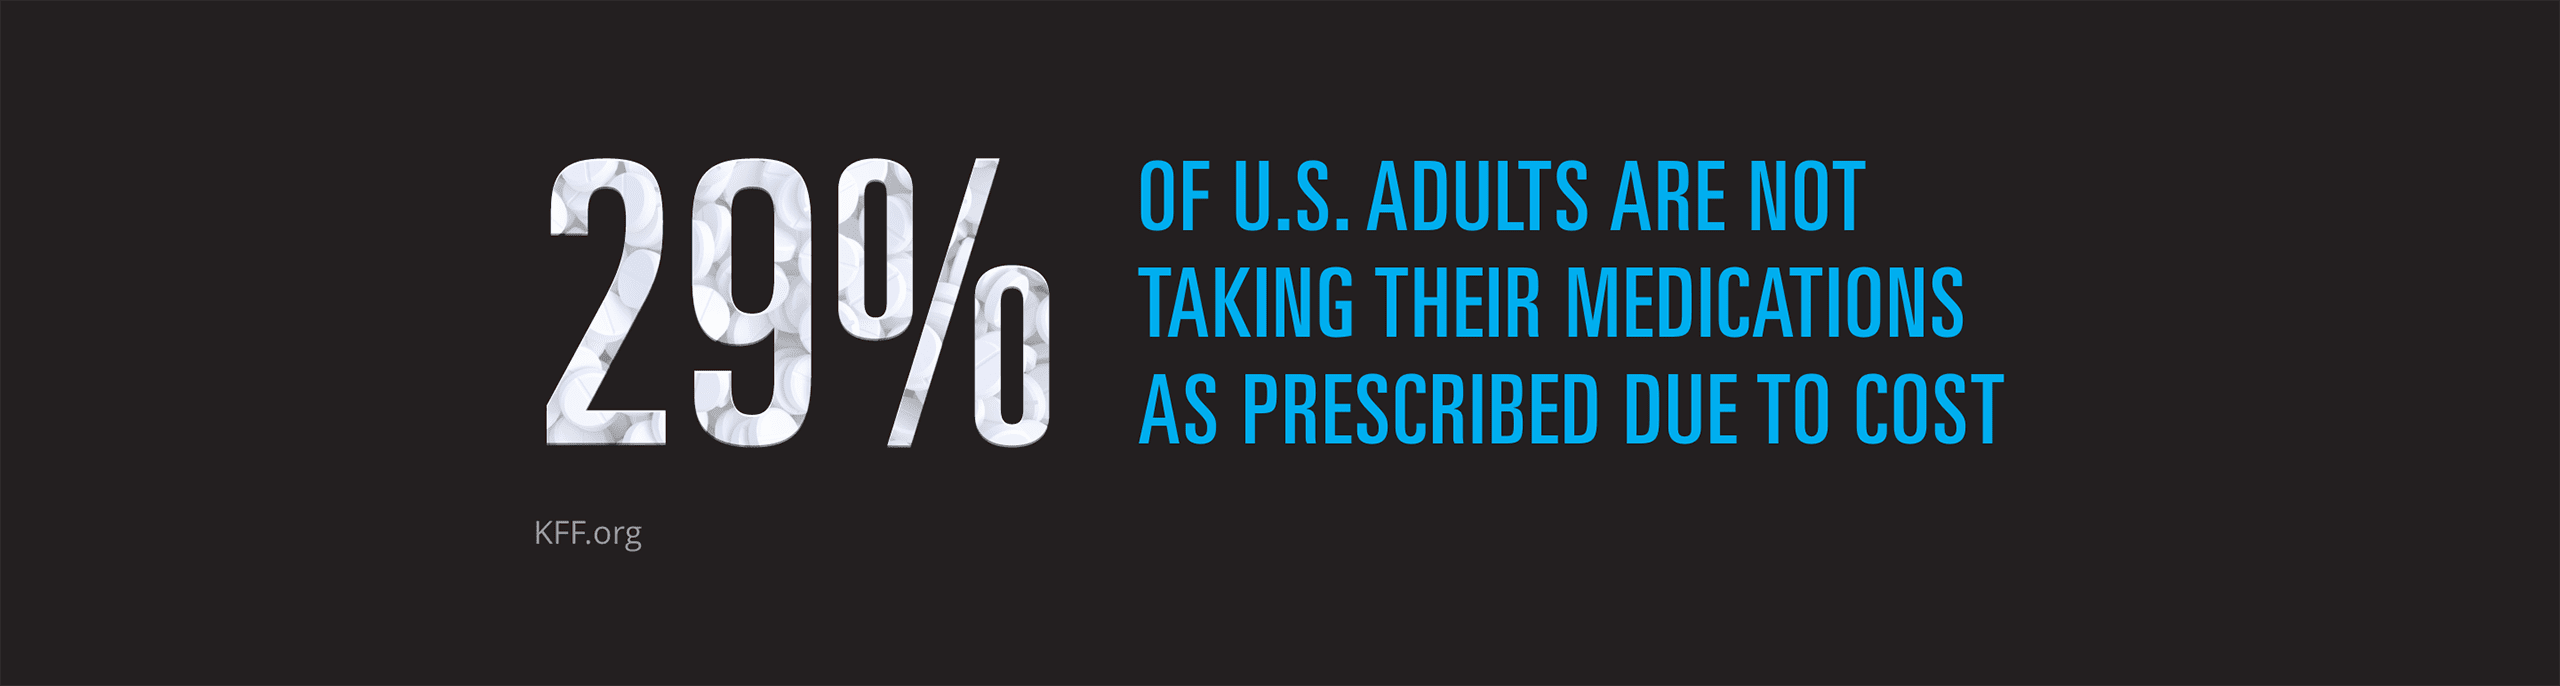 29% of U.S. adults are not taking their medications as prescribed due to cost (source: KFF.org)